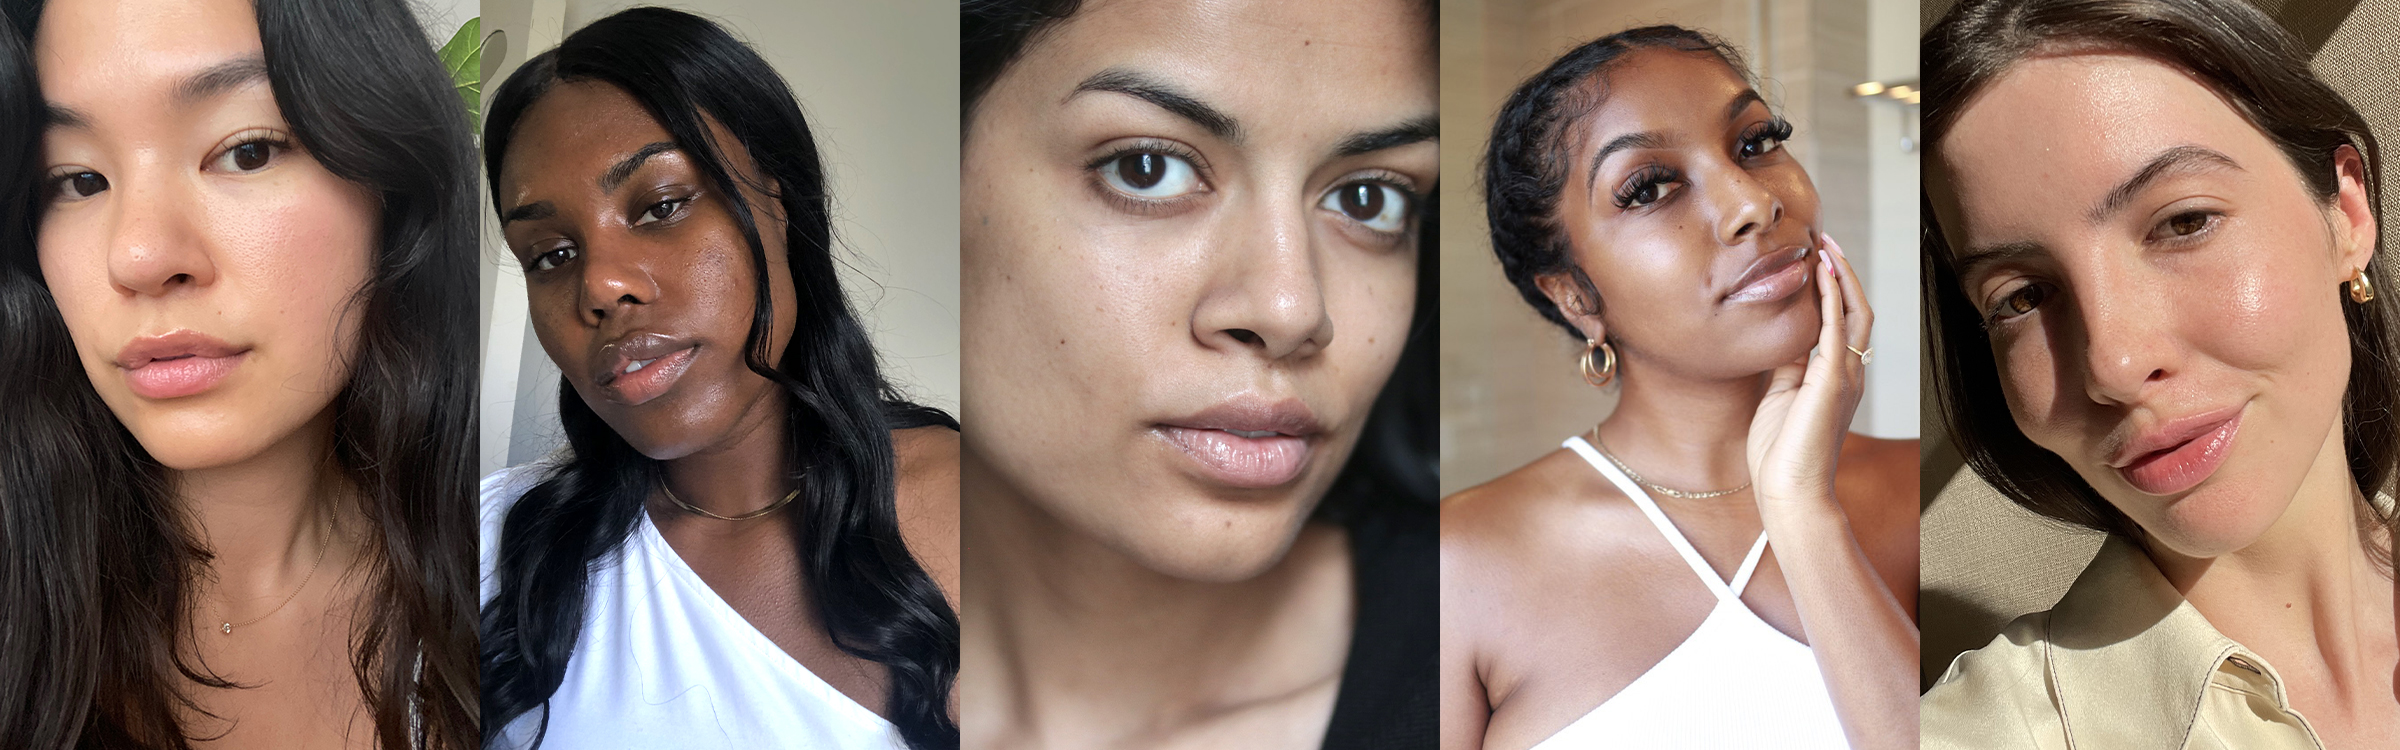 I Asked 5 Women: What's the Meaning of Beauty?